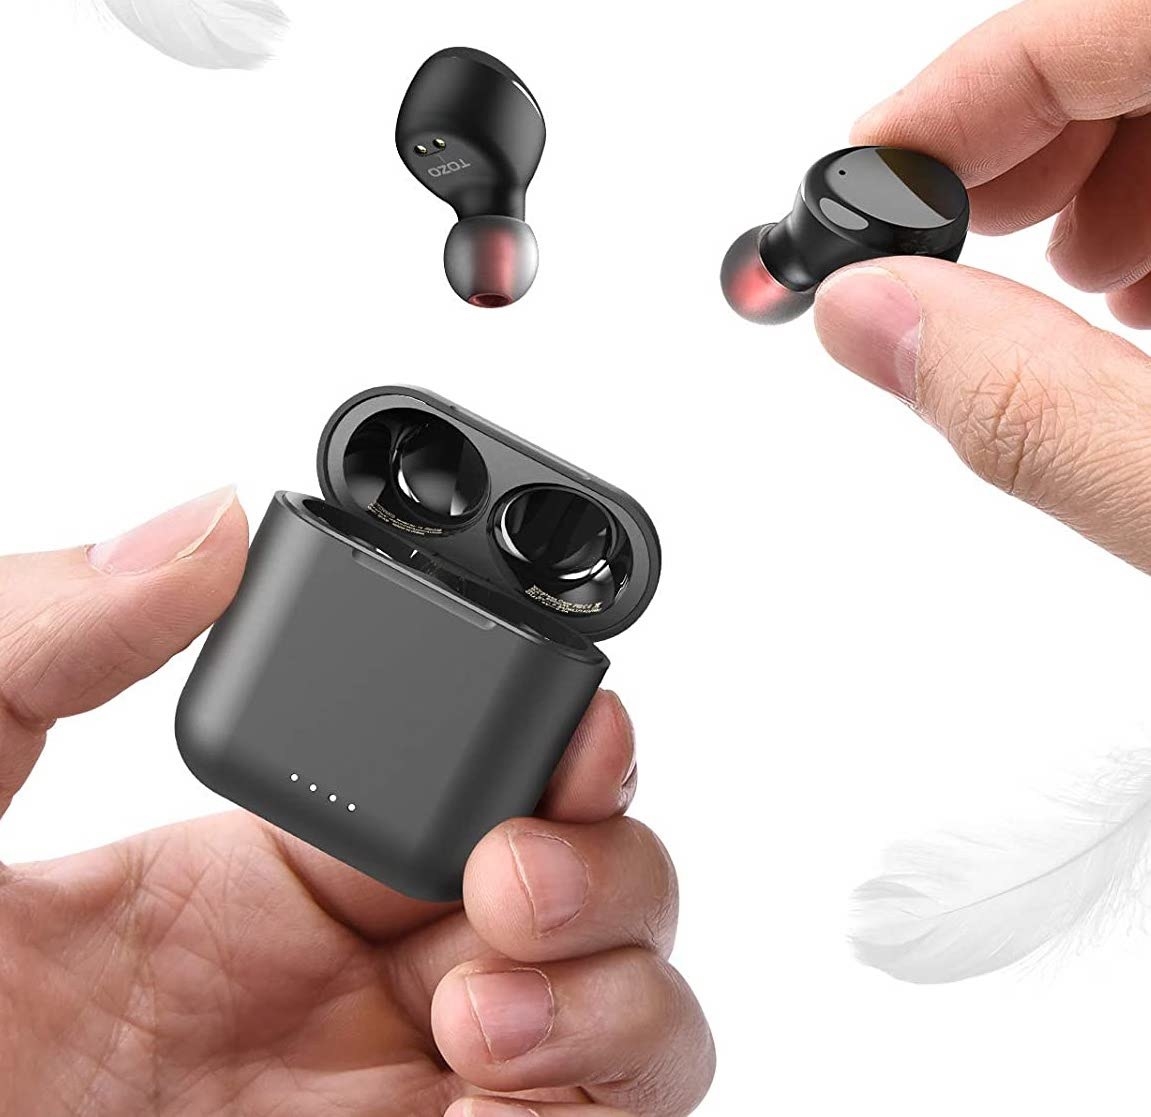 pair of hands holding the black earbuds and their case